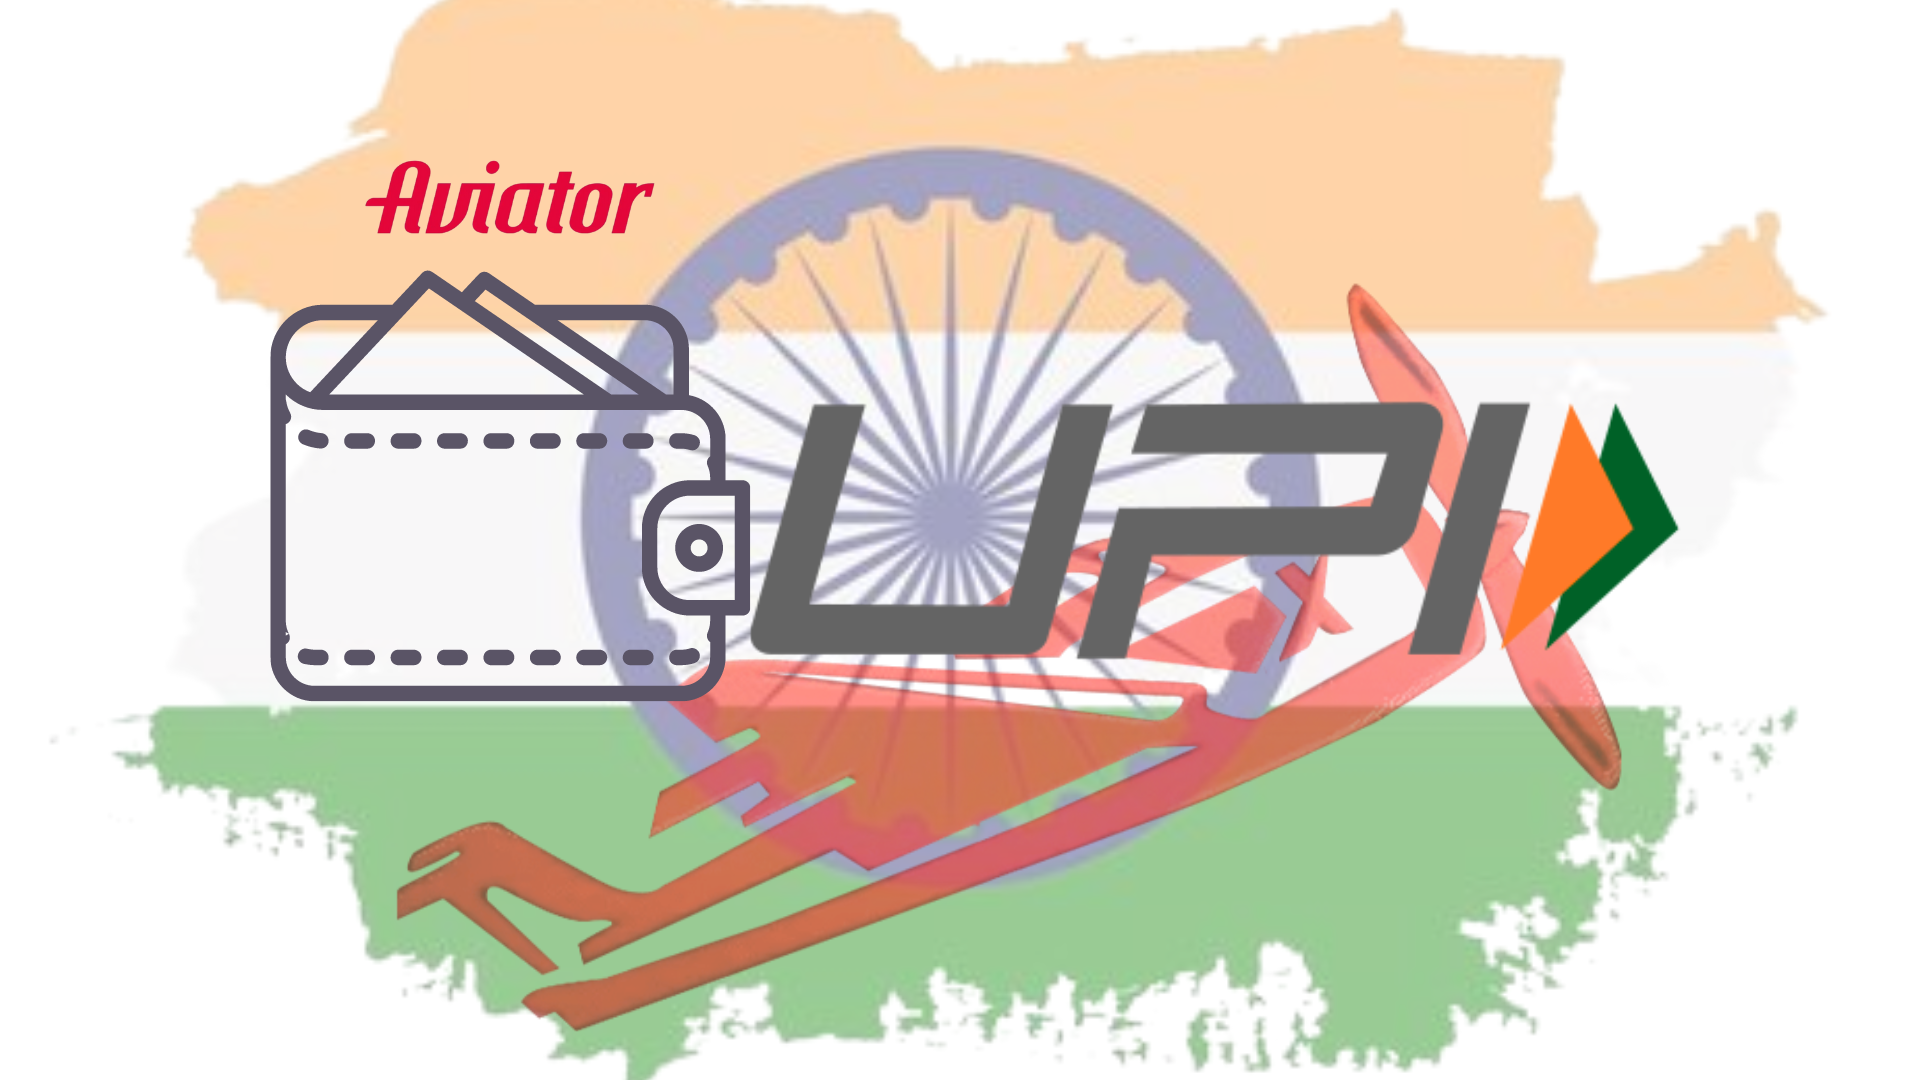 An icon of the wallet with UPI and Aviator logos, and Indian flag background